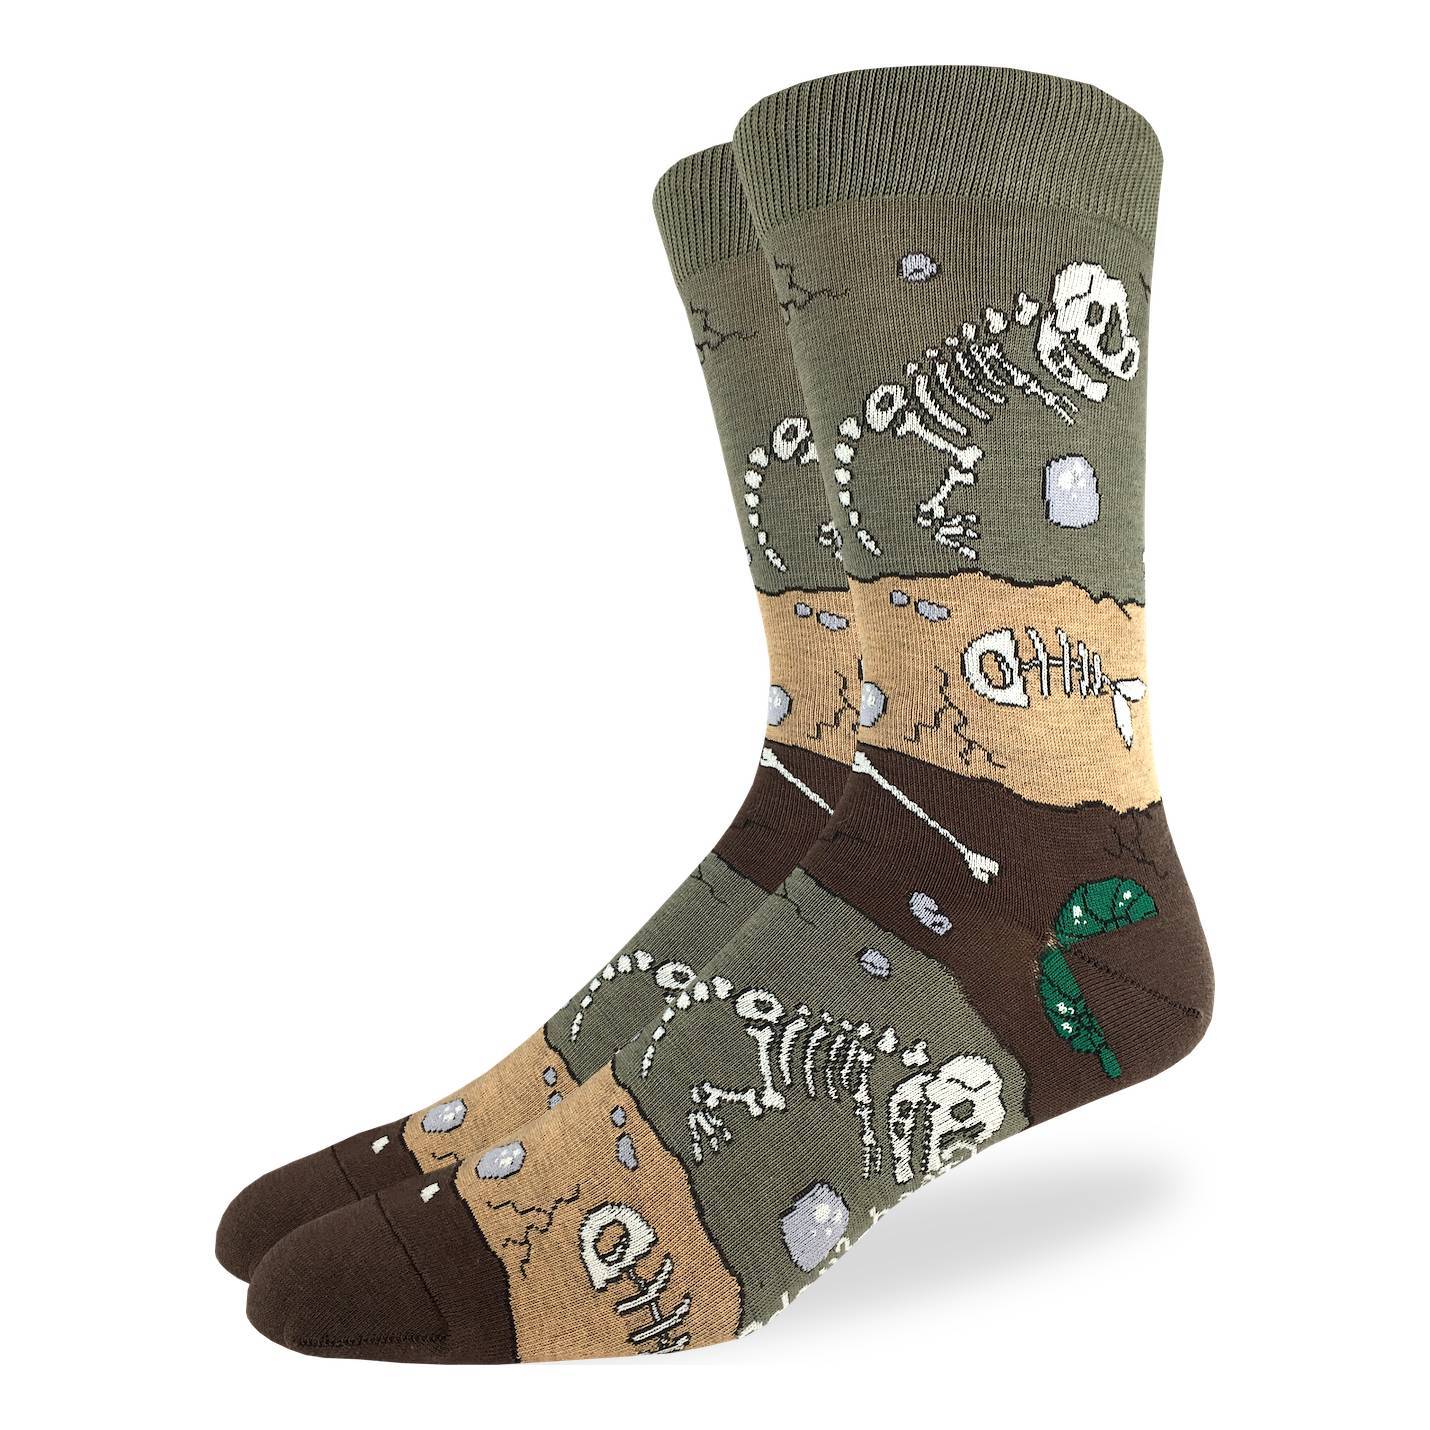 Fossil layer socks size 7-12